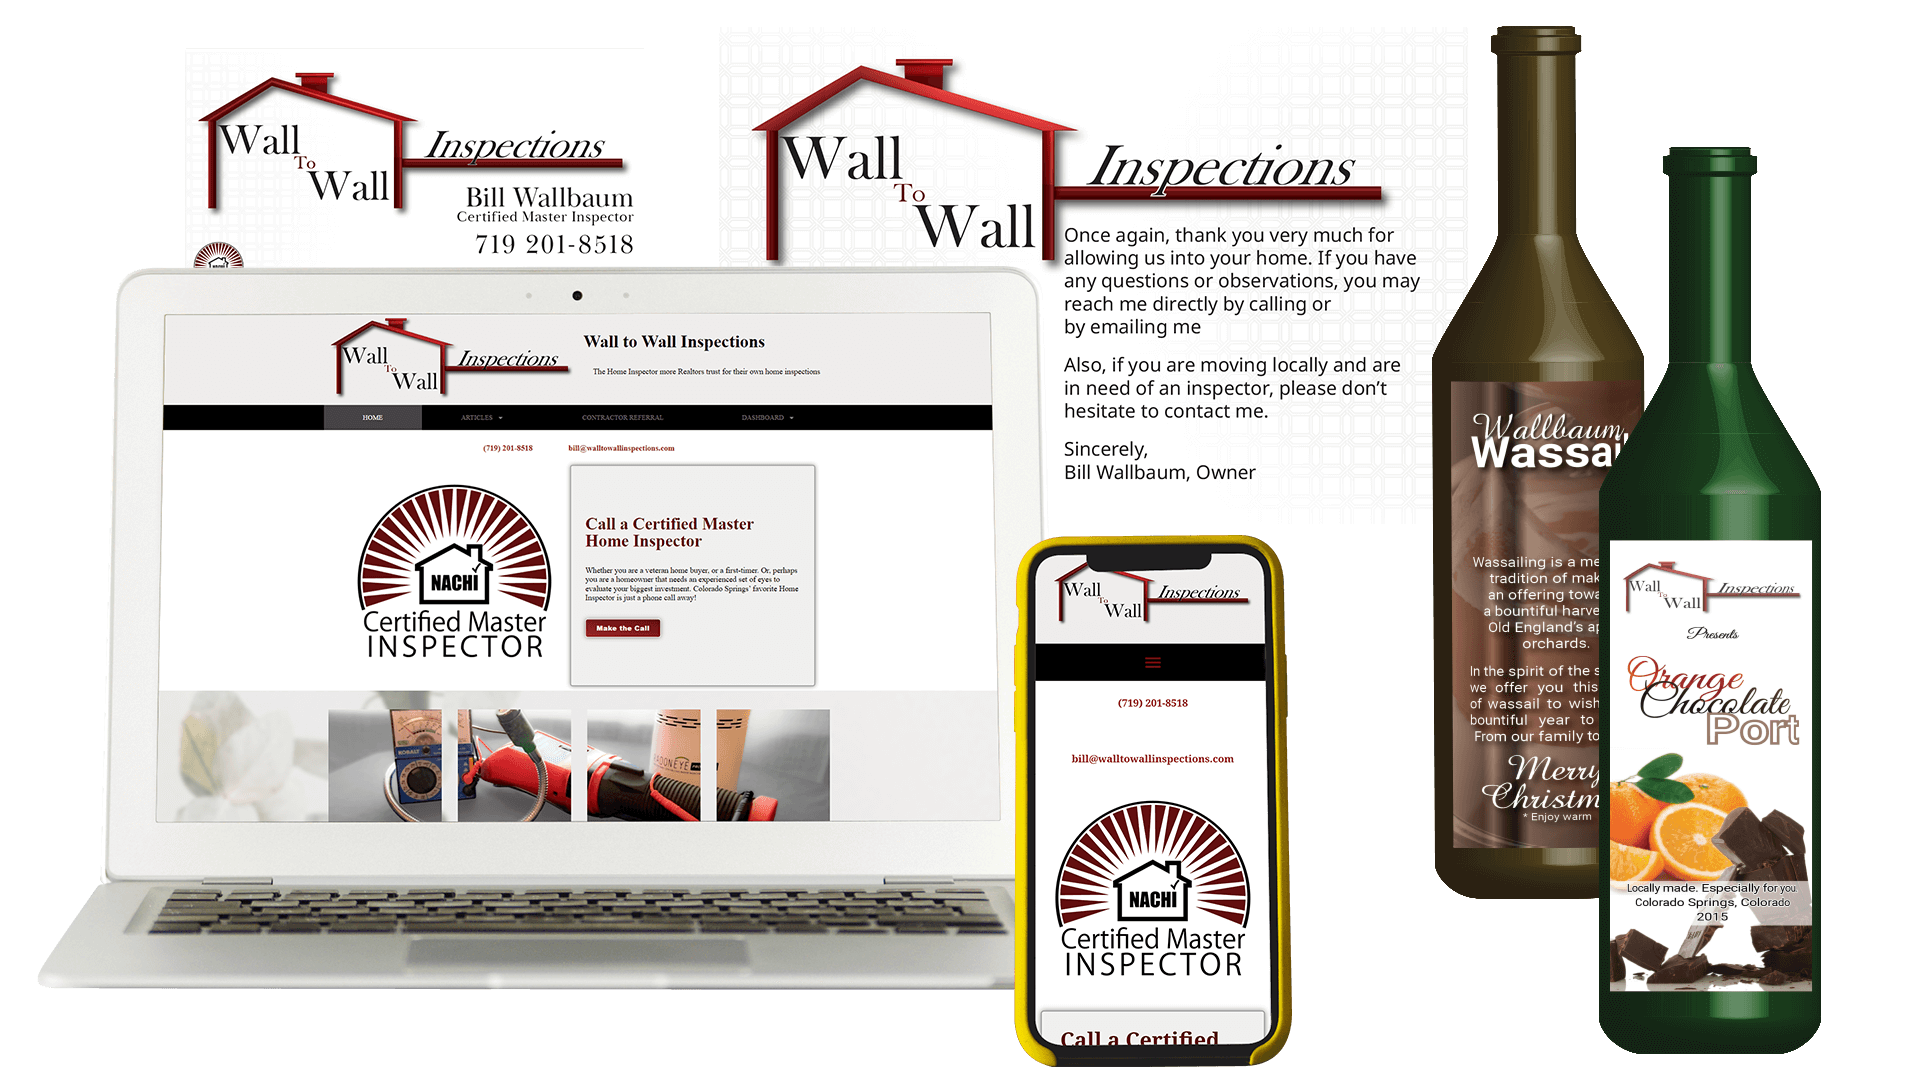 This collage showcases various design elements for Wall to Wall Inspections' brand identity and marketing materials, including mockups of their mobile-friendly website in both mobile and desktop views, bottle labels, and other printed materials like a postcard and business cards.